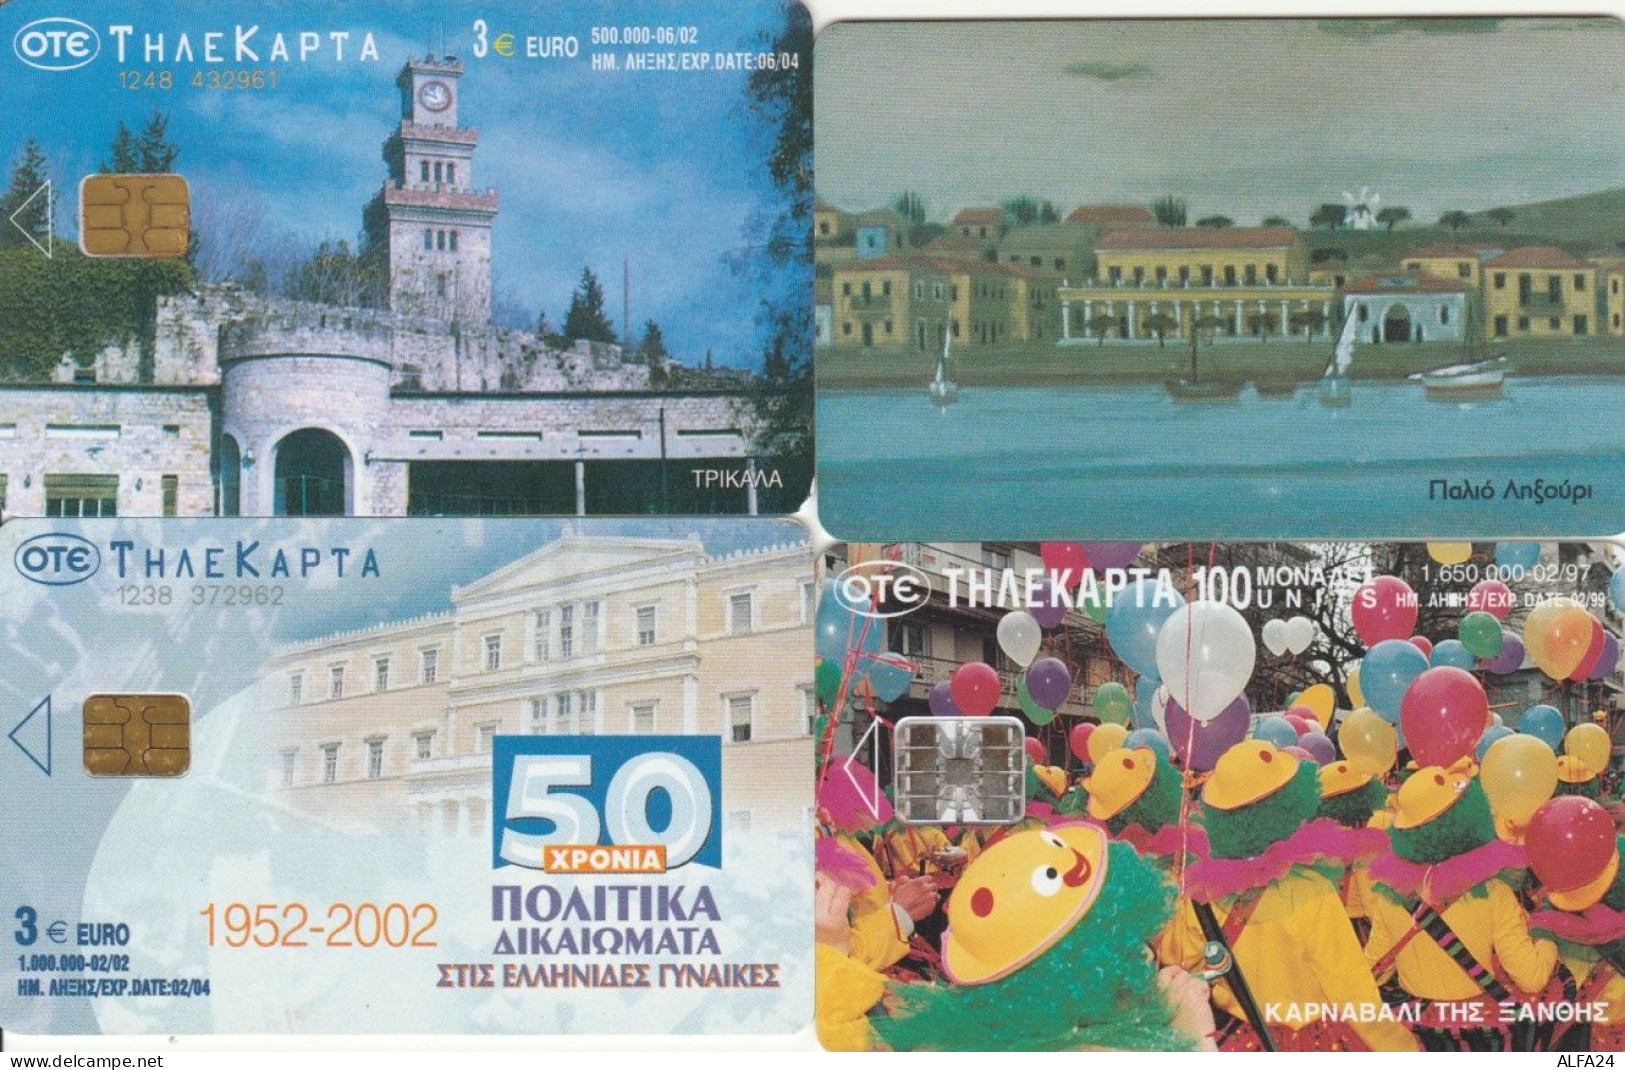 LOT 4 PHONE CARDS GRECIA (PY2064 - Griechenland